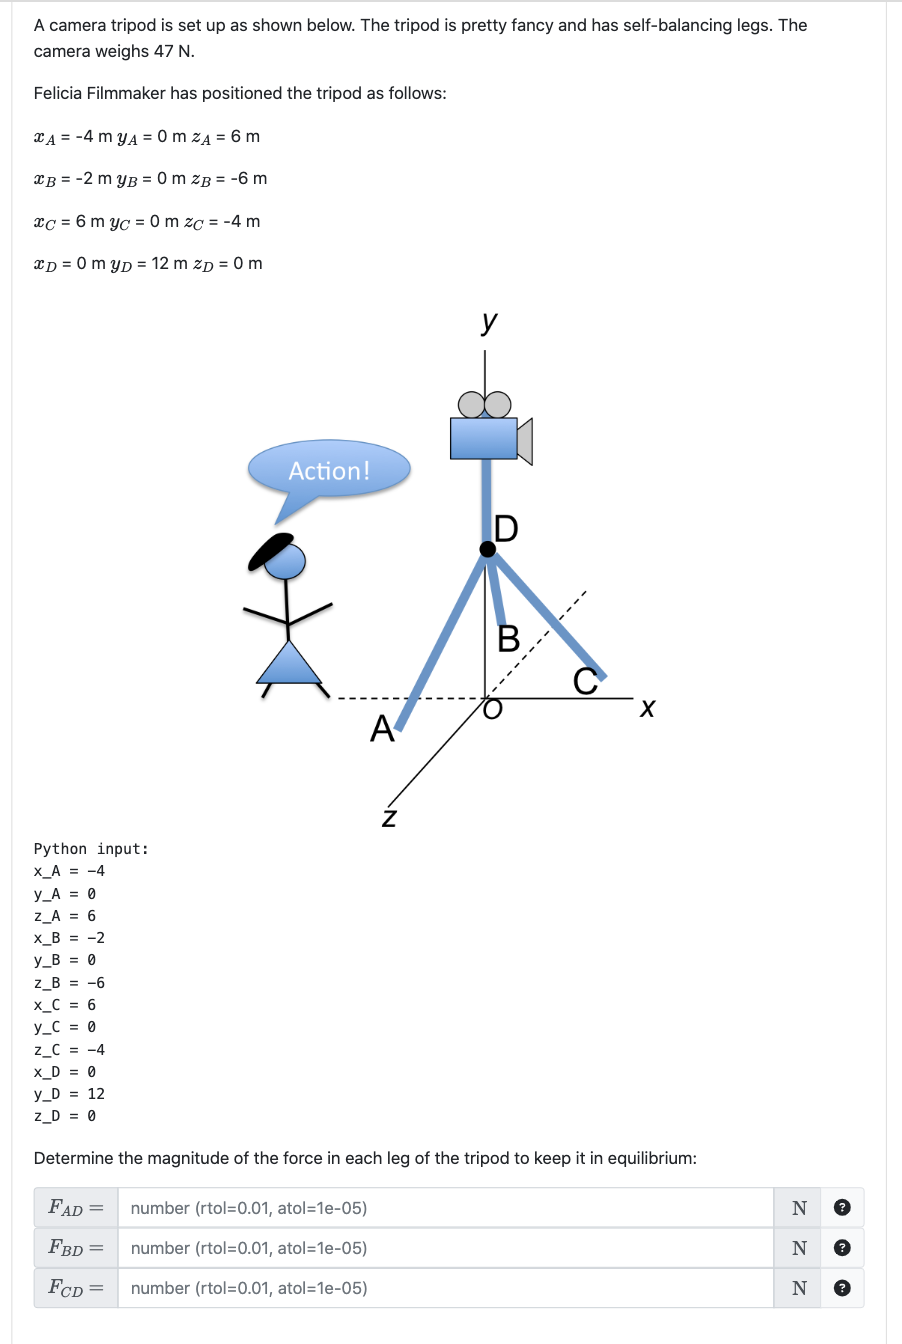 A camera tripod is set up as shown below. The tripod is pretty fancy and has self-balancing legs. The
camera weighs 47 N.
Felicia Filmmaker has positioned the tripod as follows:
CA=-4 myA=0 m zĄ = 6 m
B = -2 myB = 0 m zB = -6 m
xc = 6 myc = 0 m zc = -4 m
xD = 0 myD = 12 m ZD = 0 m
Python input:
X_A = -4
y_A = 0
Z_A = 6
X_B = -2
y_B = 0
Z_B = -6
X_C = 6
y_C = 0
Z_C = -4
X_D = 0
y_D = 12
Z_D = 0
Action!
A
Z
number (rtol=0.01, atol=1e-05)
number (rtol=0.01, atol=1e-05)
number (rtol=0.01, atol=1e-05)
y
D
B
---
X
Determine the magnitude of the force in each leg of the tripod to keep it in equilibrium:
FAD =
FBD =
FCD =
N ?
N
N